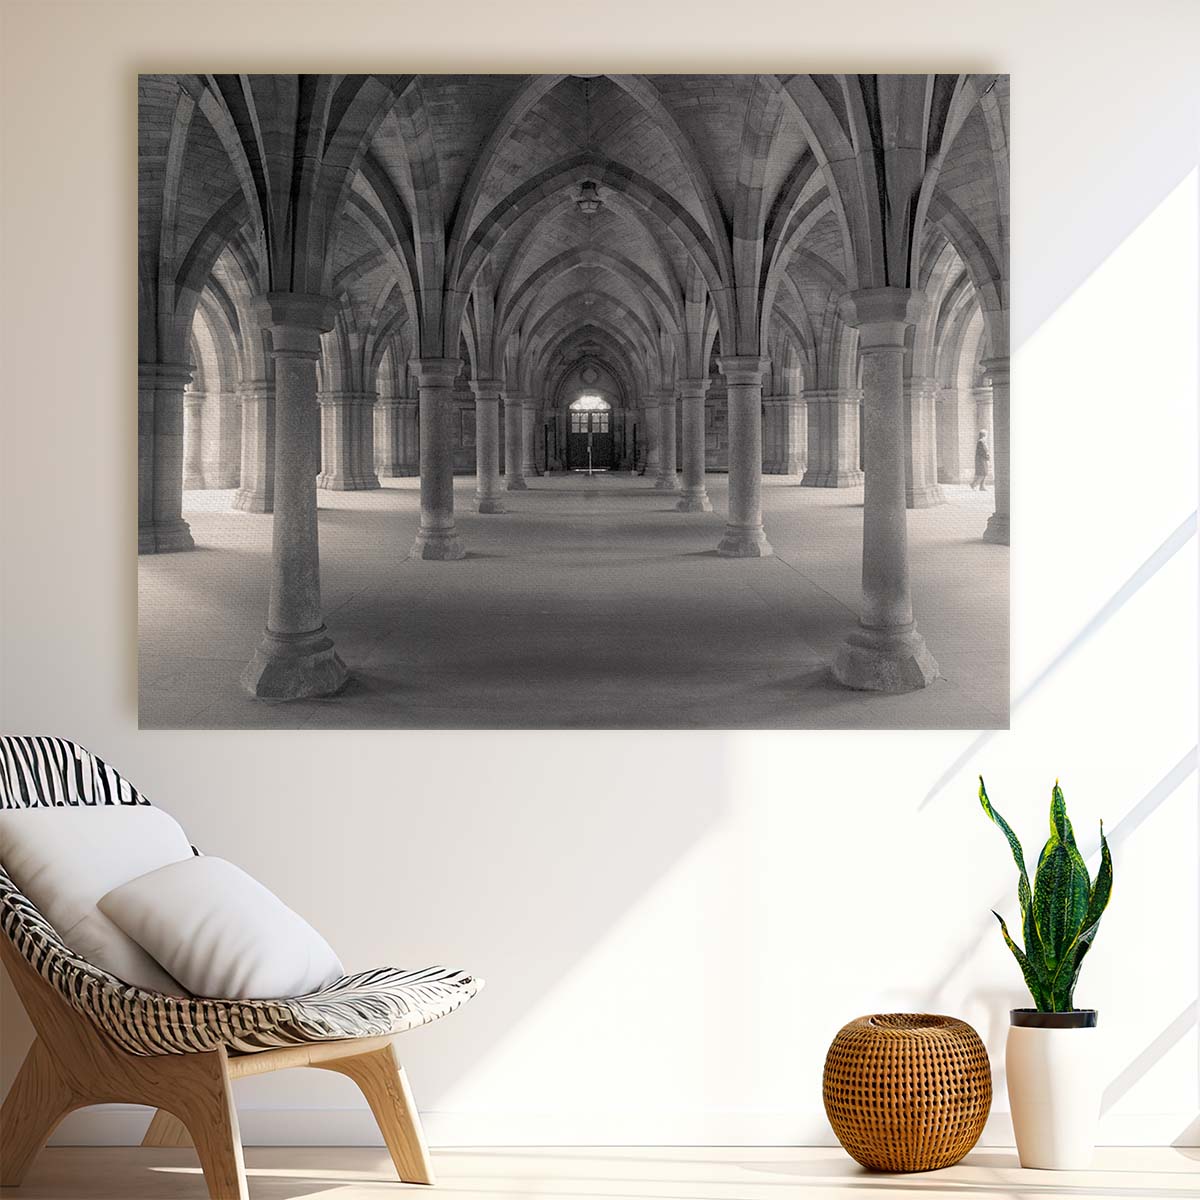 Glasgow University Historic Architecture Panorama Wall Art by Luxuriance Designs. Made in USA.